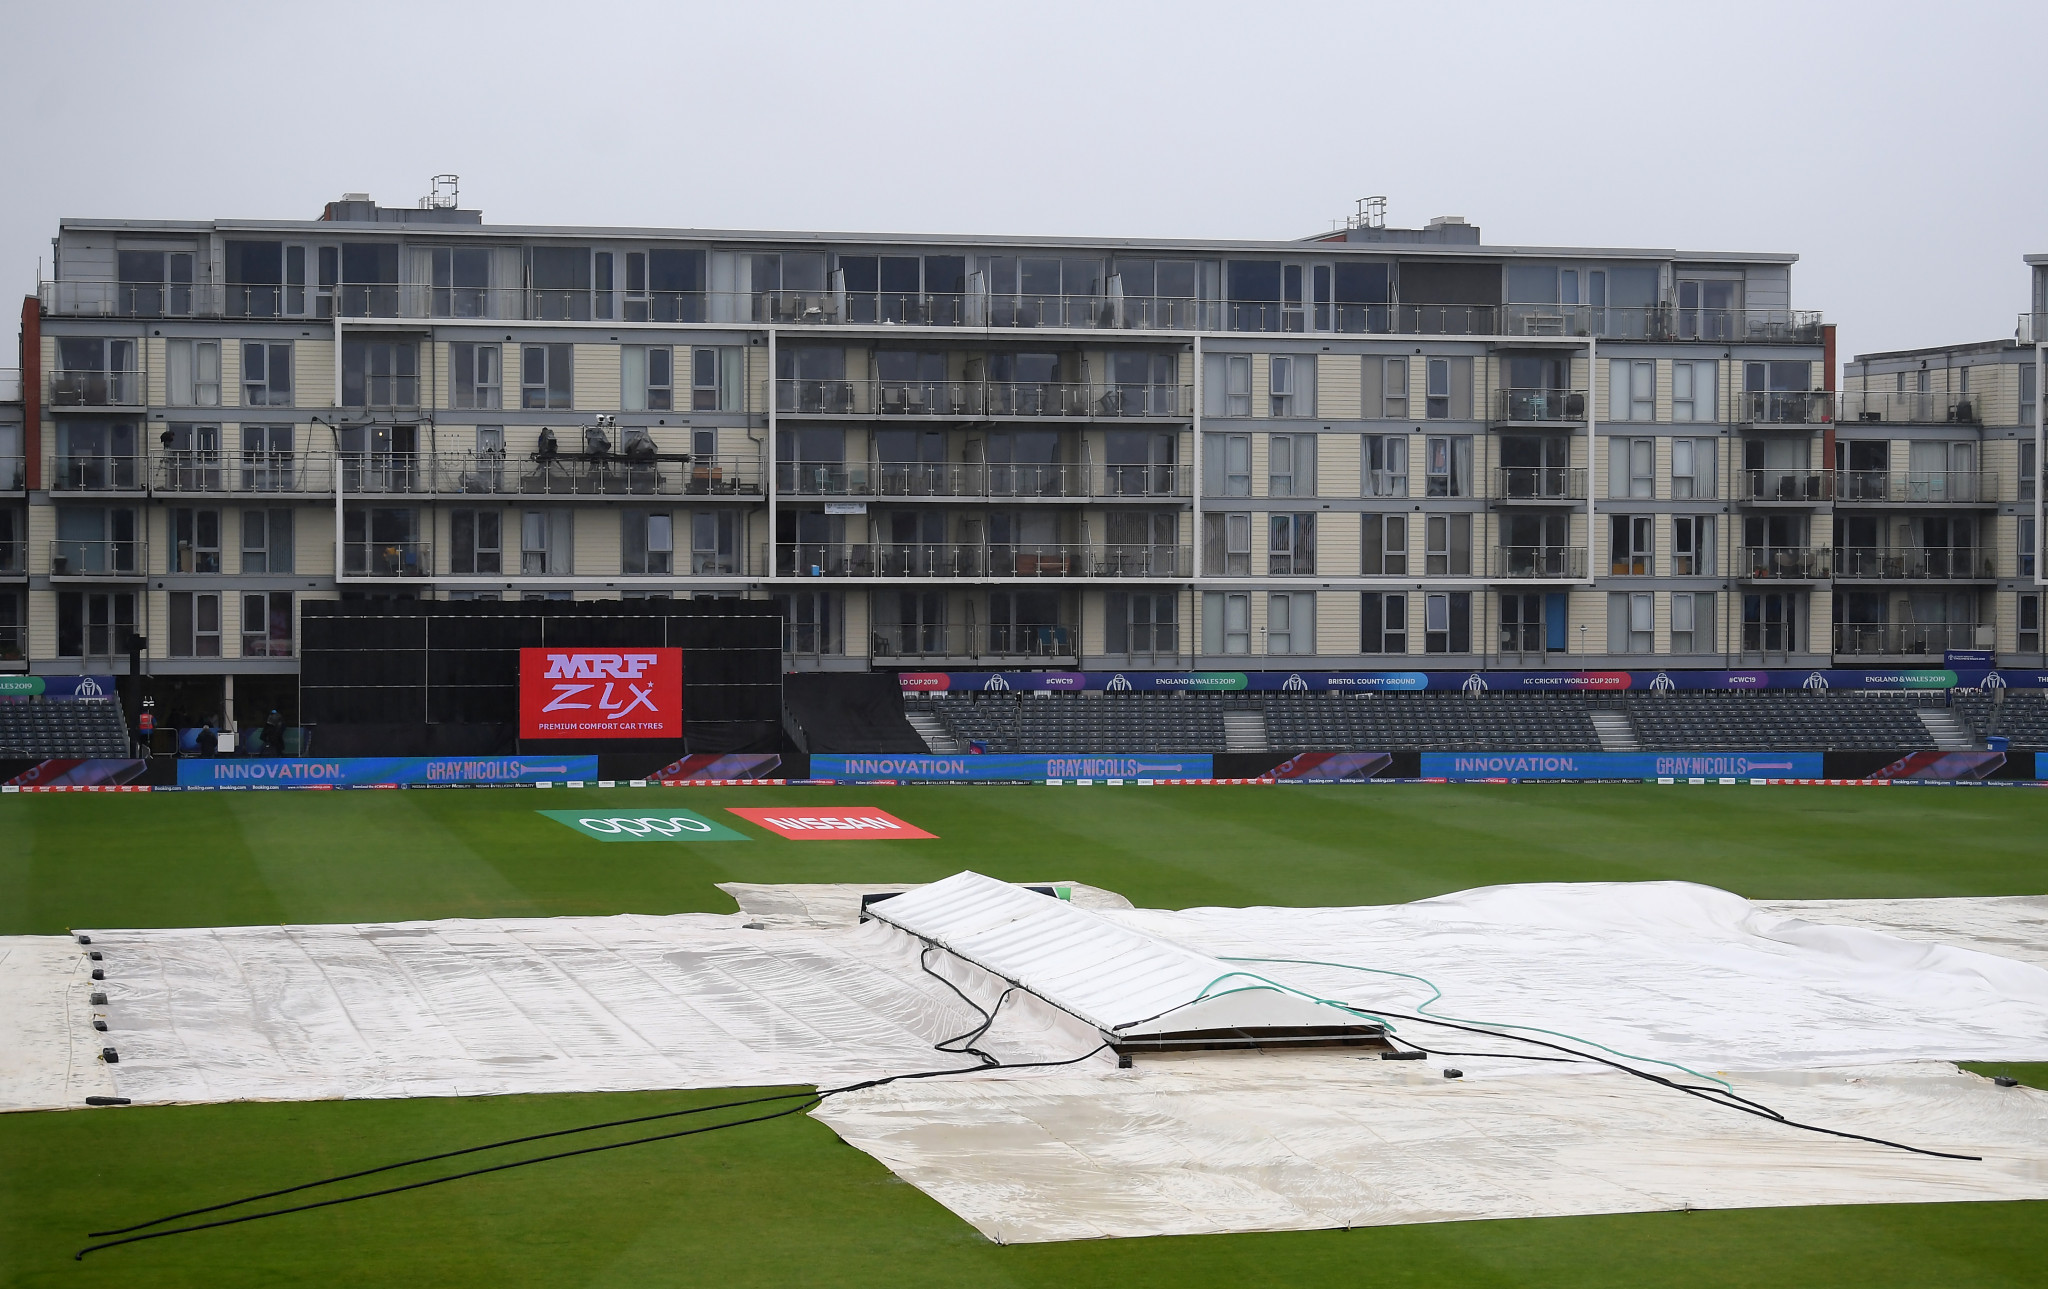 Bangladesh's match with Sri Lanka was abandoned without a ball being bowled ©Getty Images